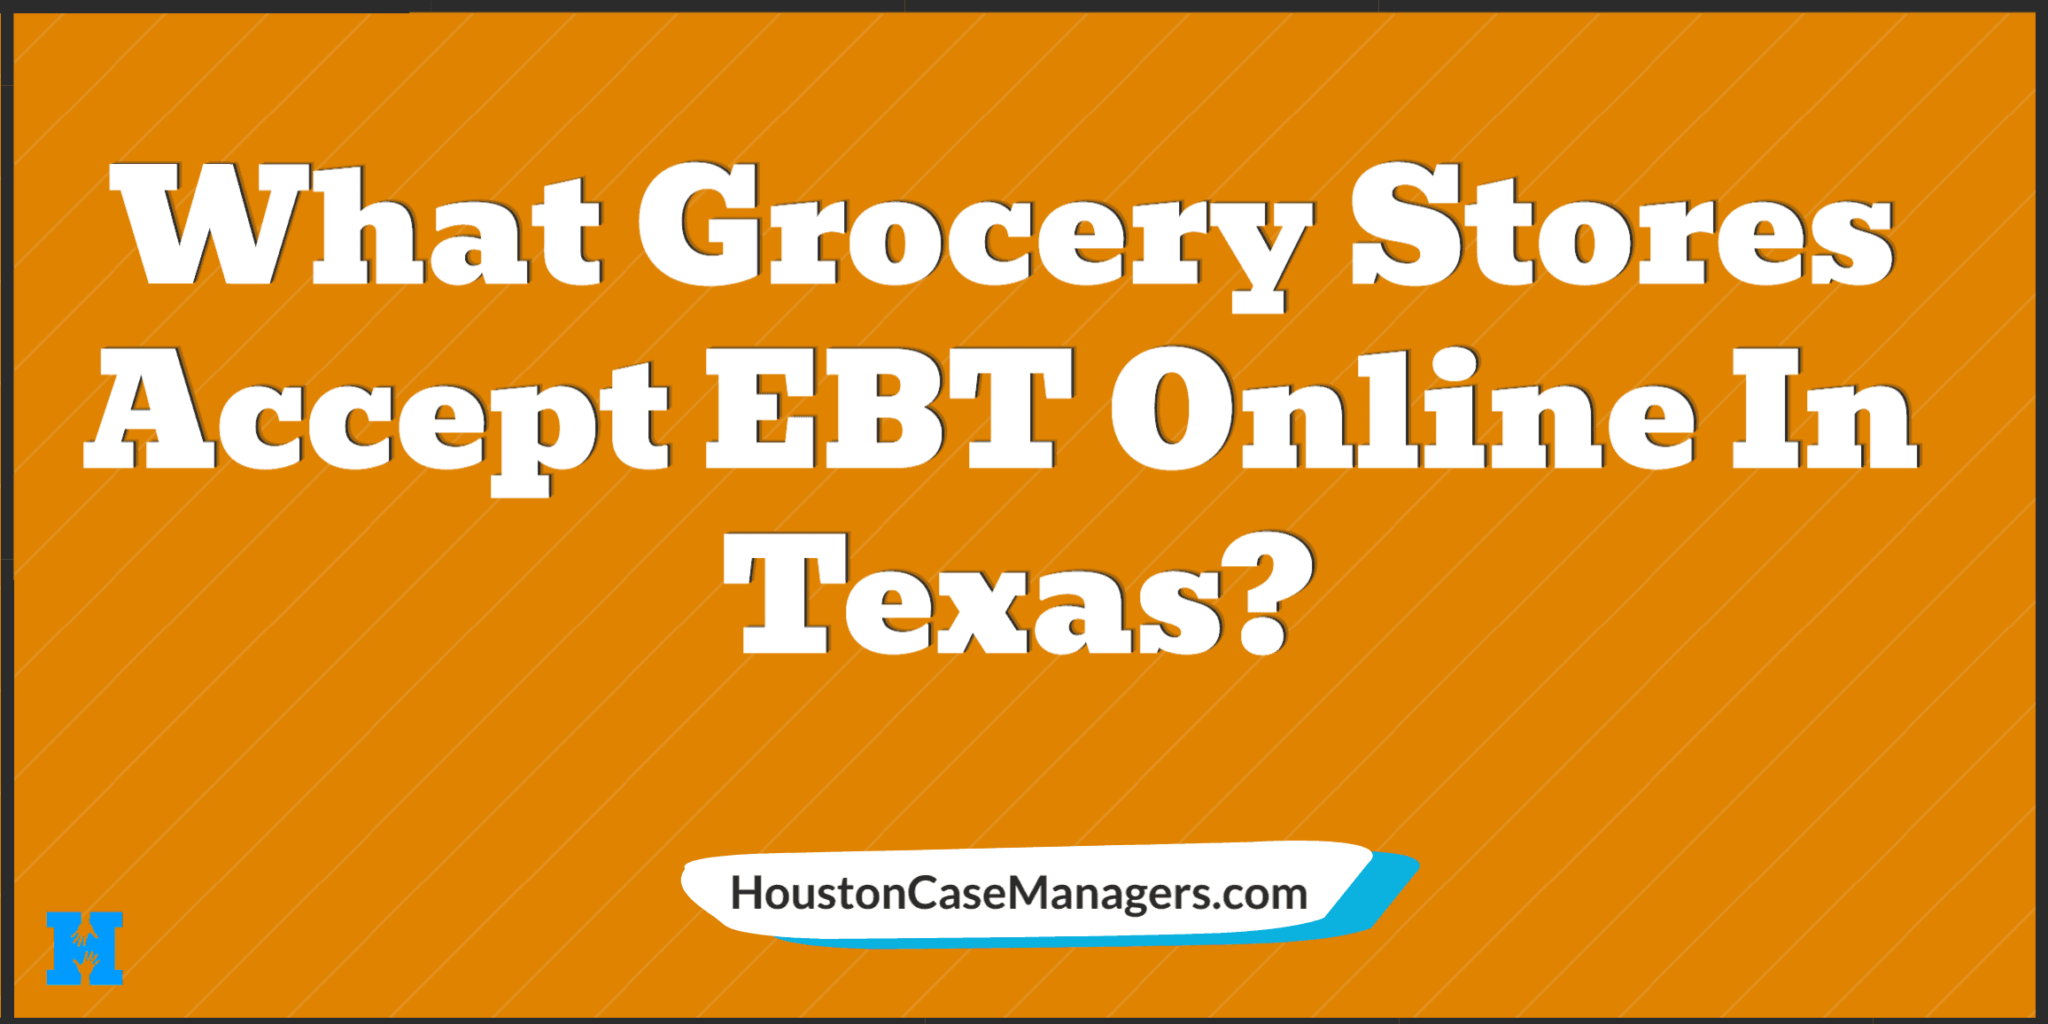 What Grocery Stores Accept EBT Online In Texas?